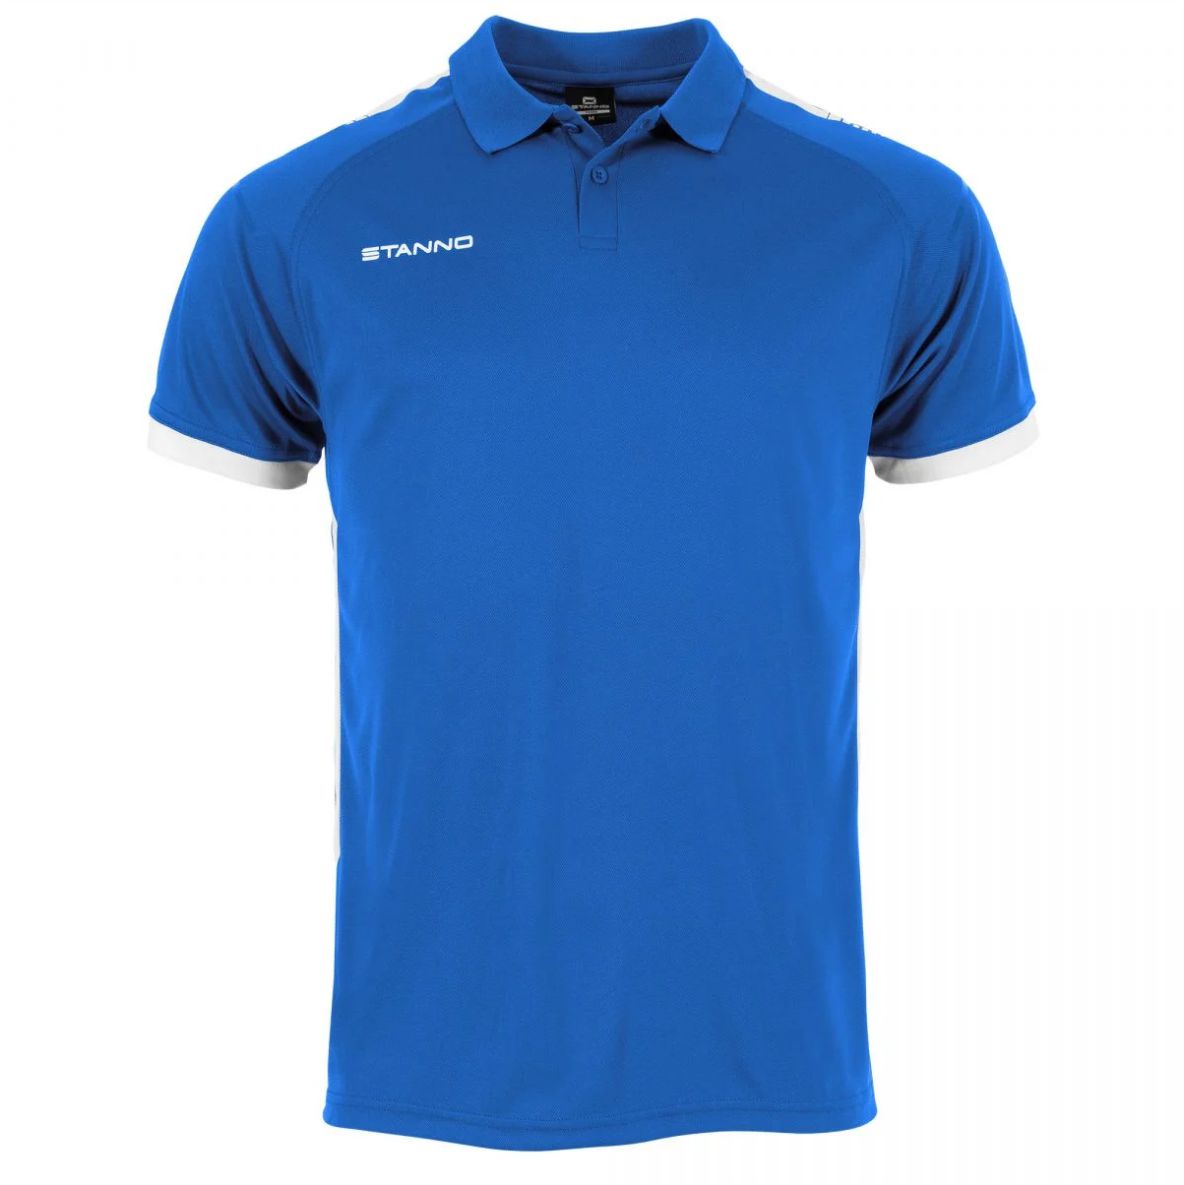 Stanno - First Polo - Royal - Adult